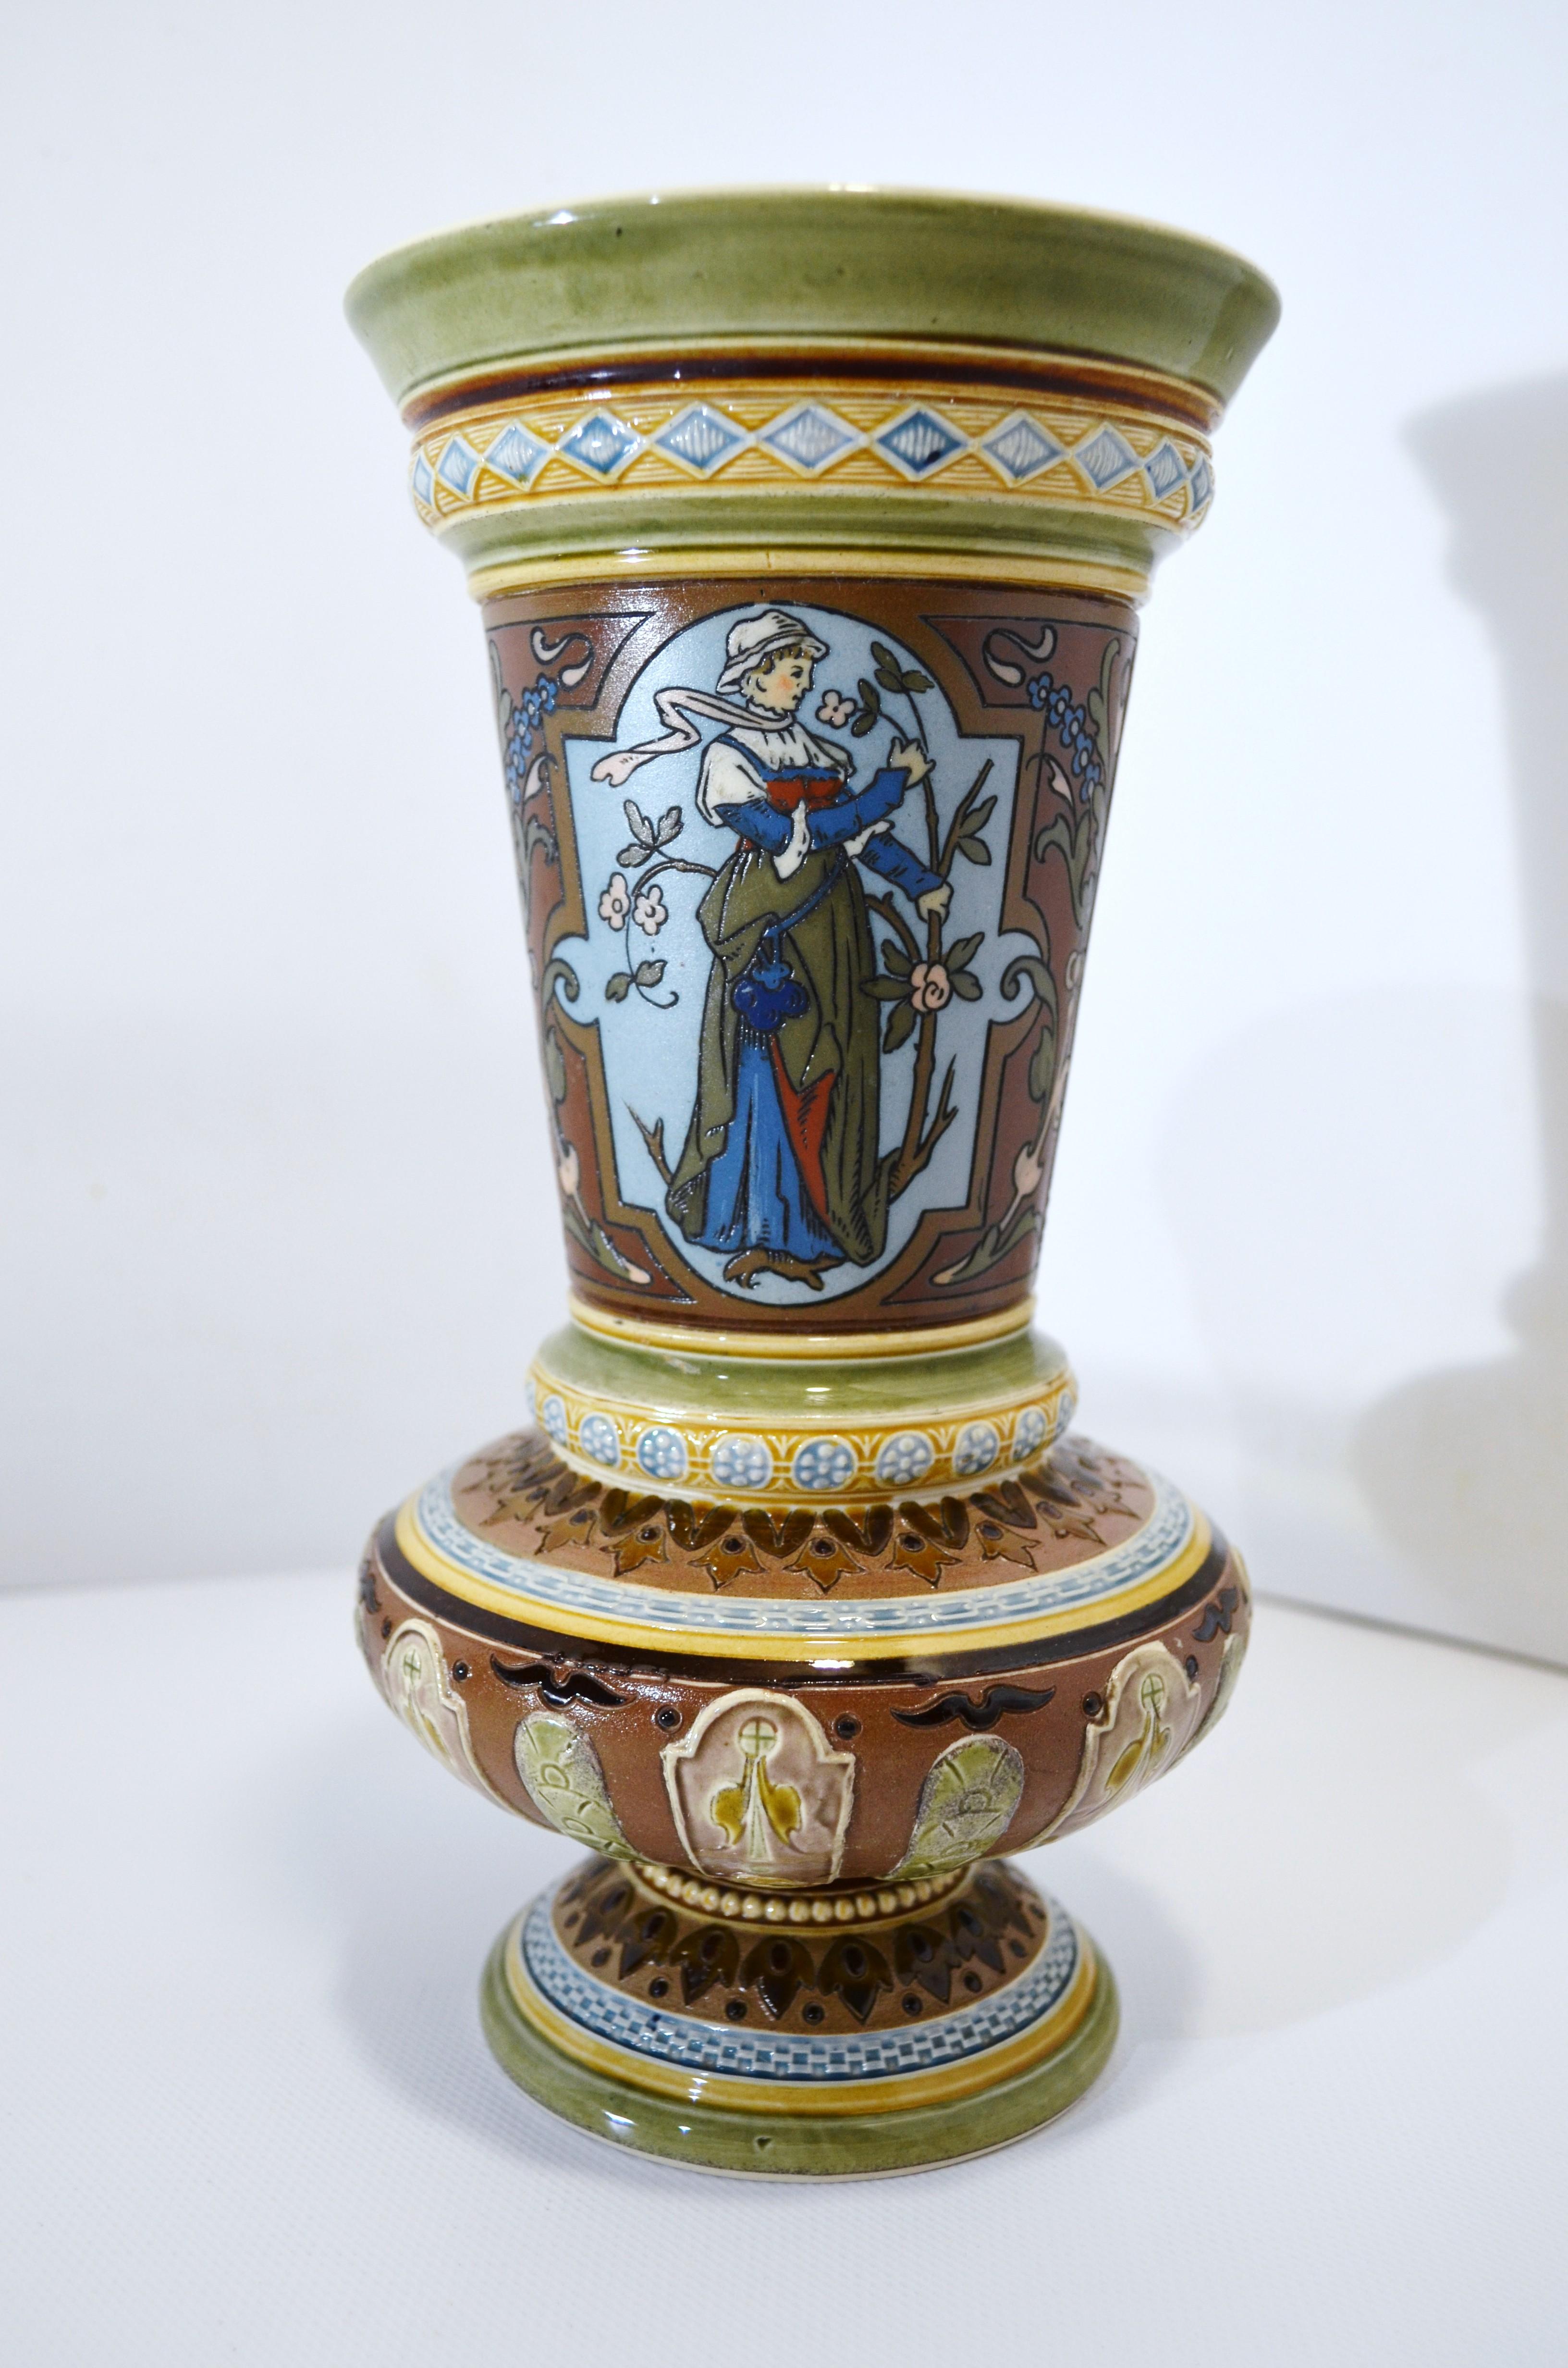 Belgian Villeroy and Boch Mettlach 1890 1900 Mosaic Ceramic Vase Decorated with Women For Sale